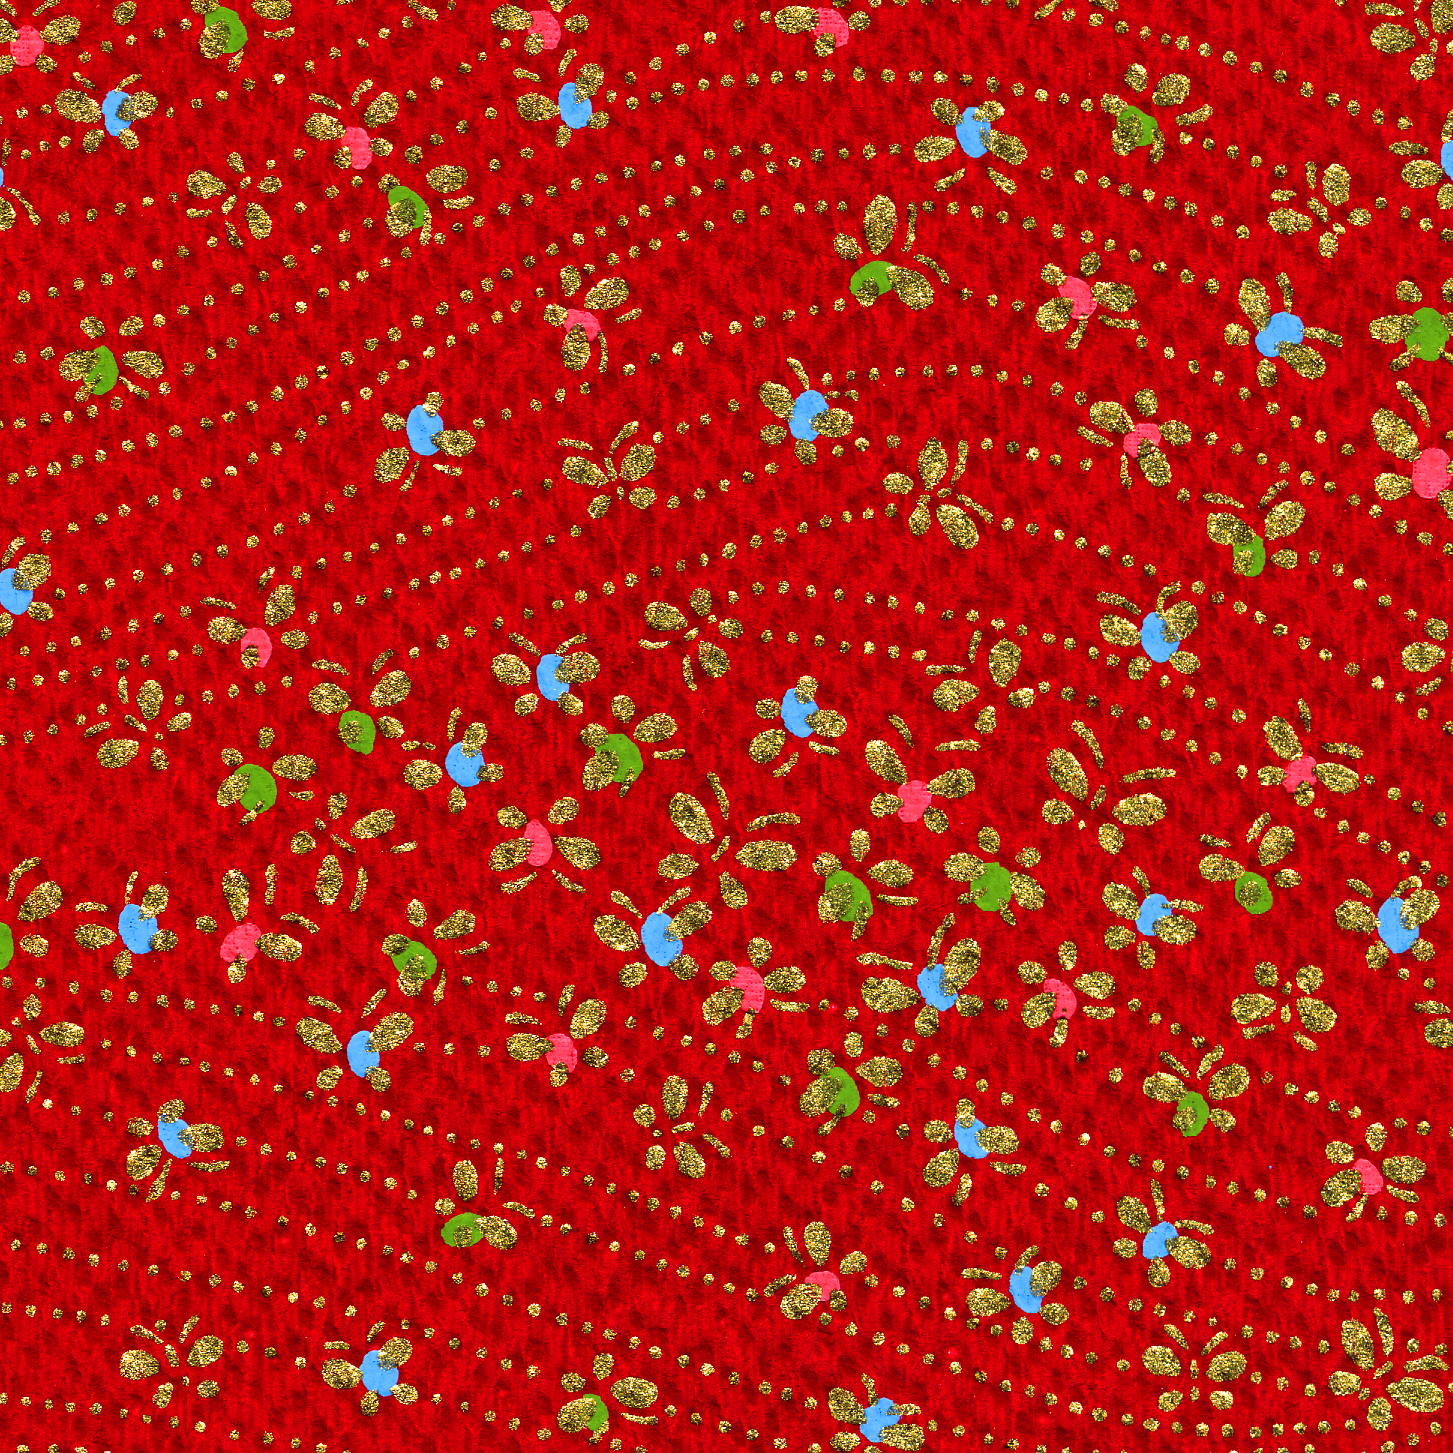 RCK9156 Red Scattered Spring Washi Paper - www.HankoDesigns.com - 8.5"x11" Japanese Washi Yuzen Paper - Fall 2014